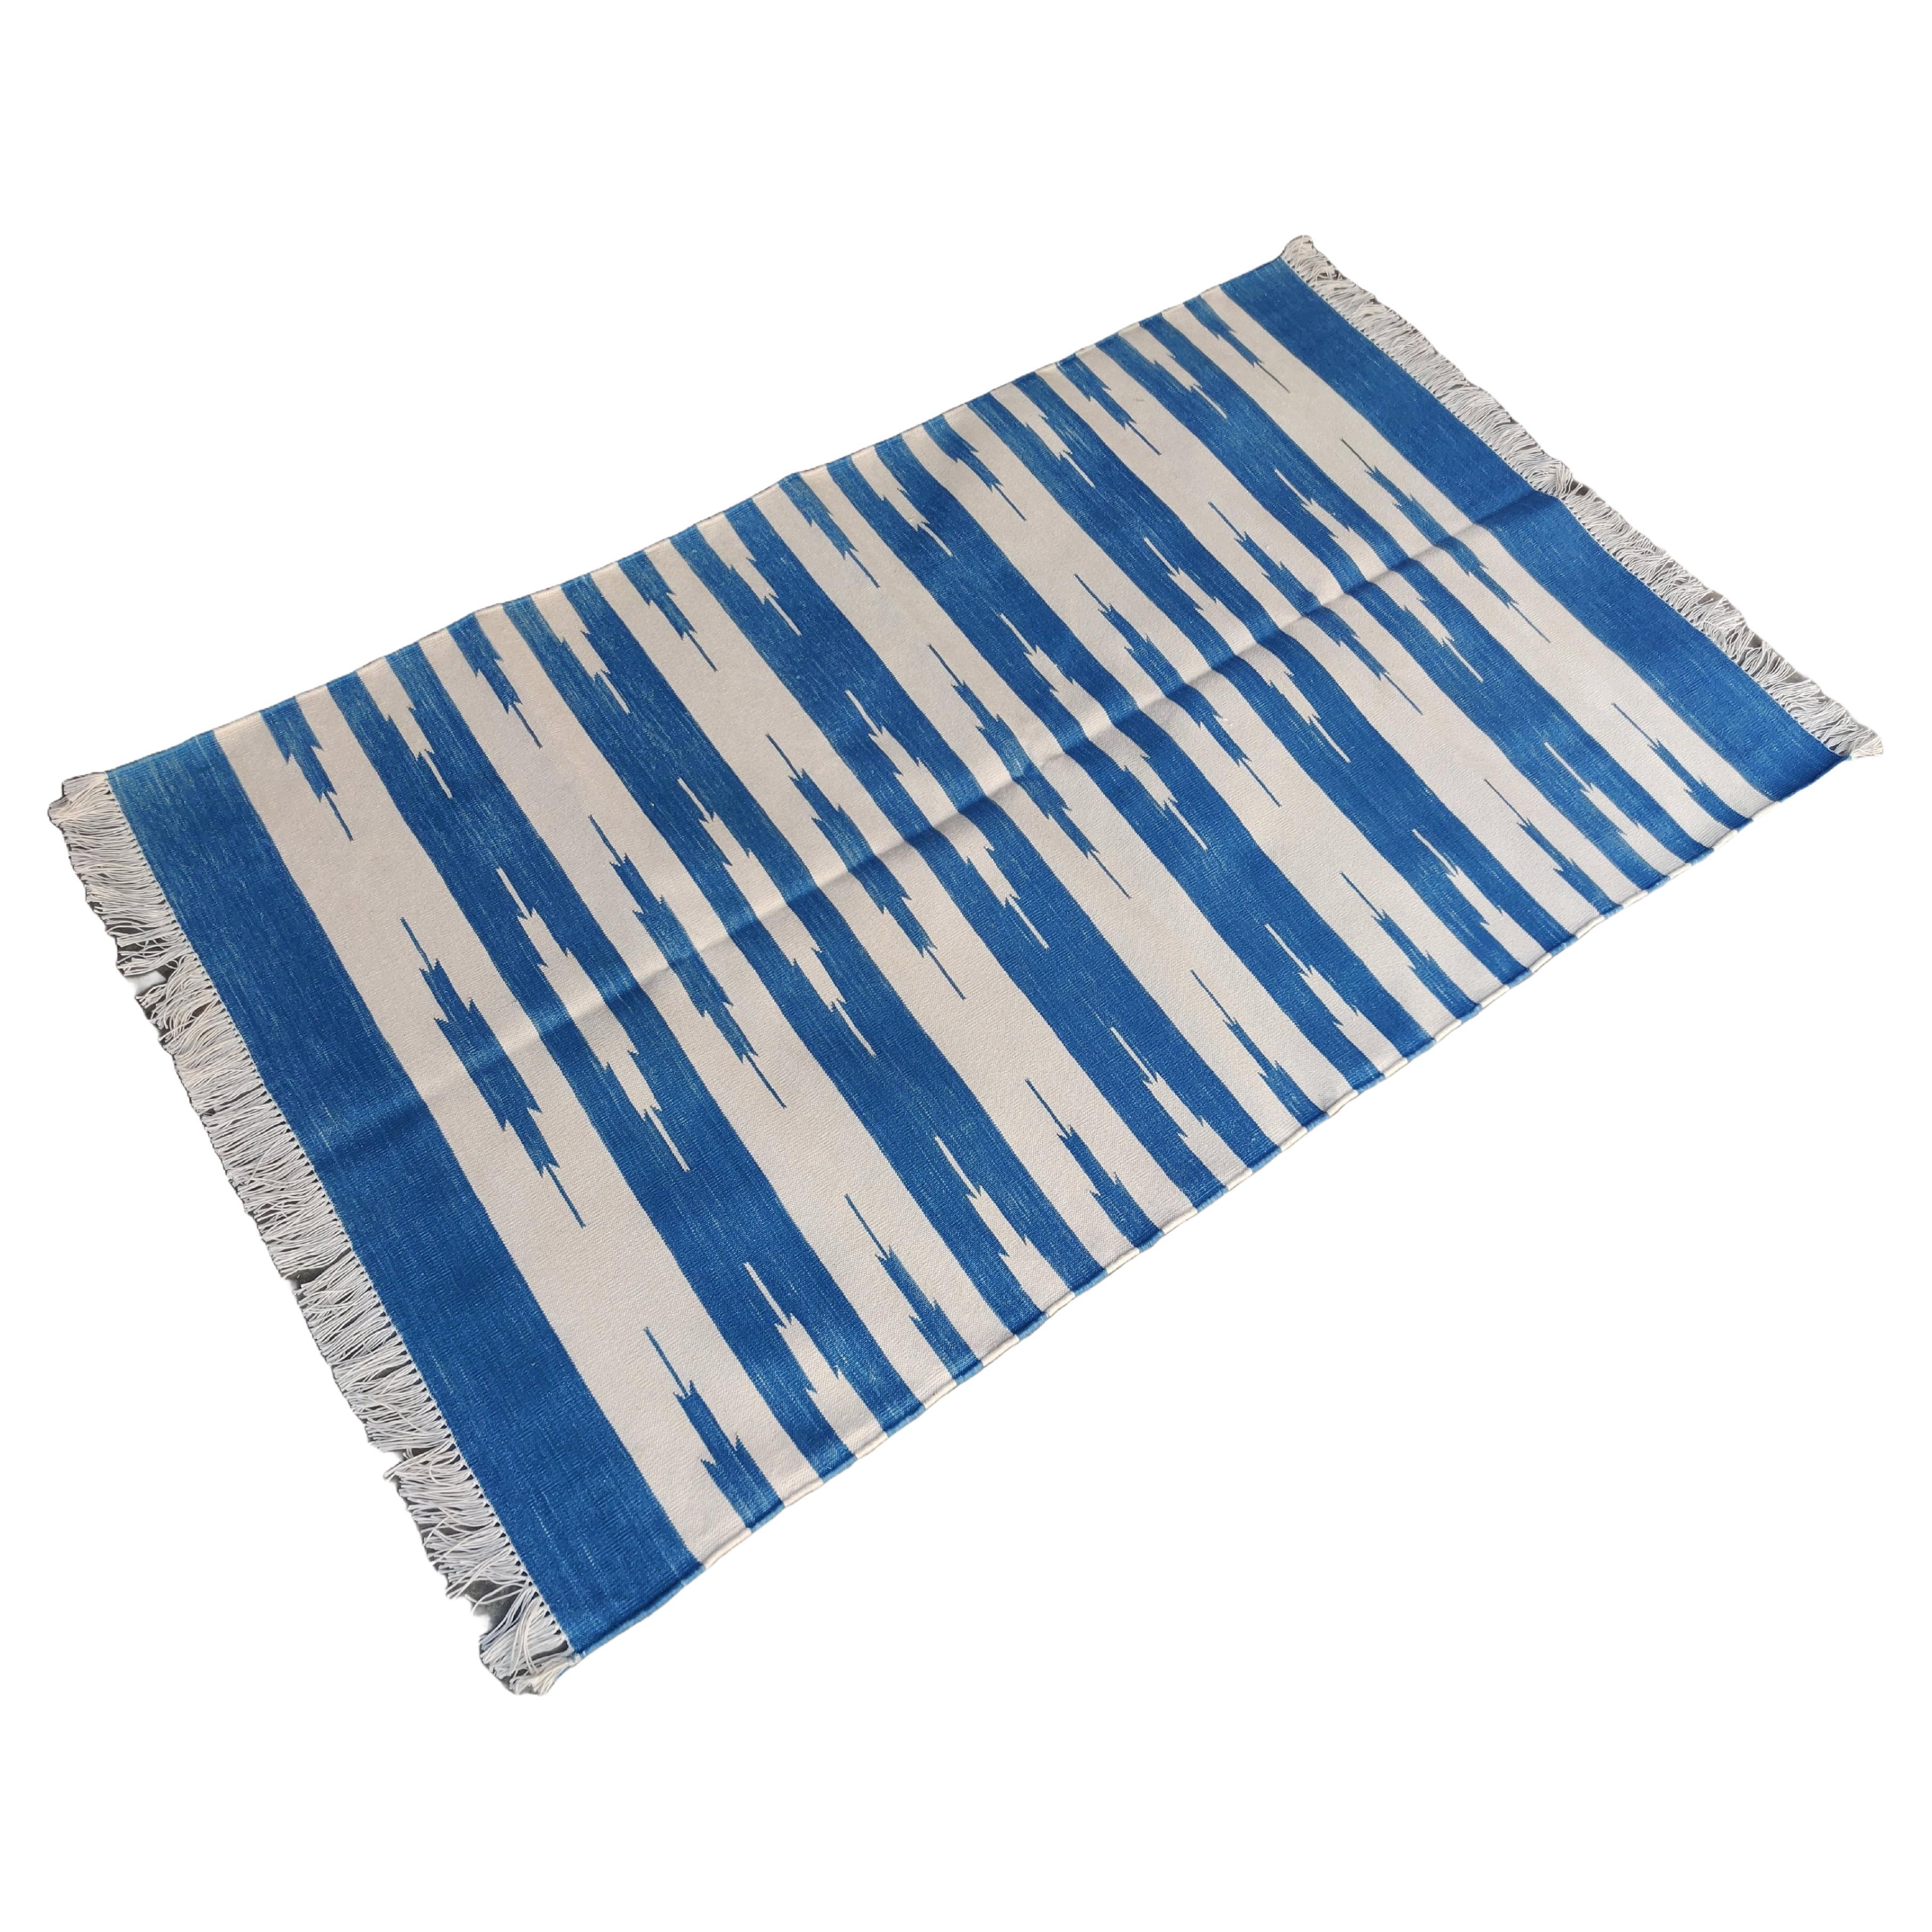 Handmade Cotton Area Flat Weave Rug, 3x5 Blue And White Striped Indian Dhurrie